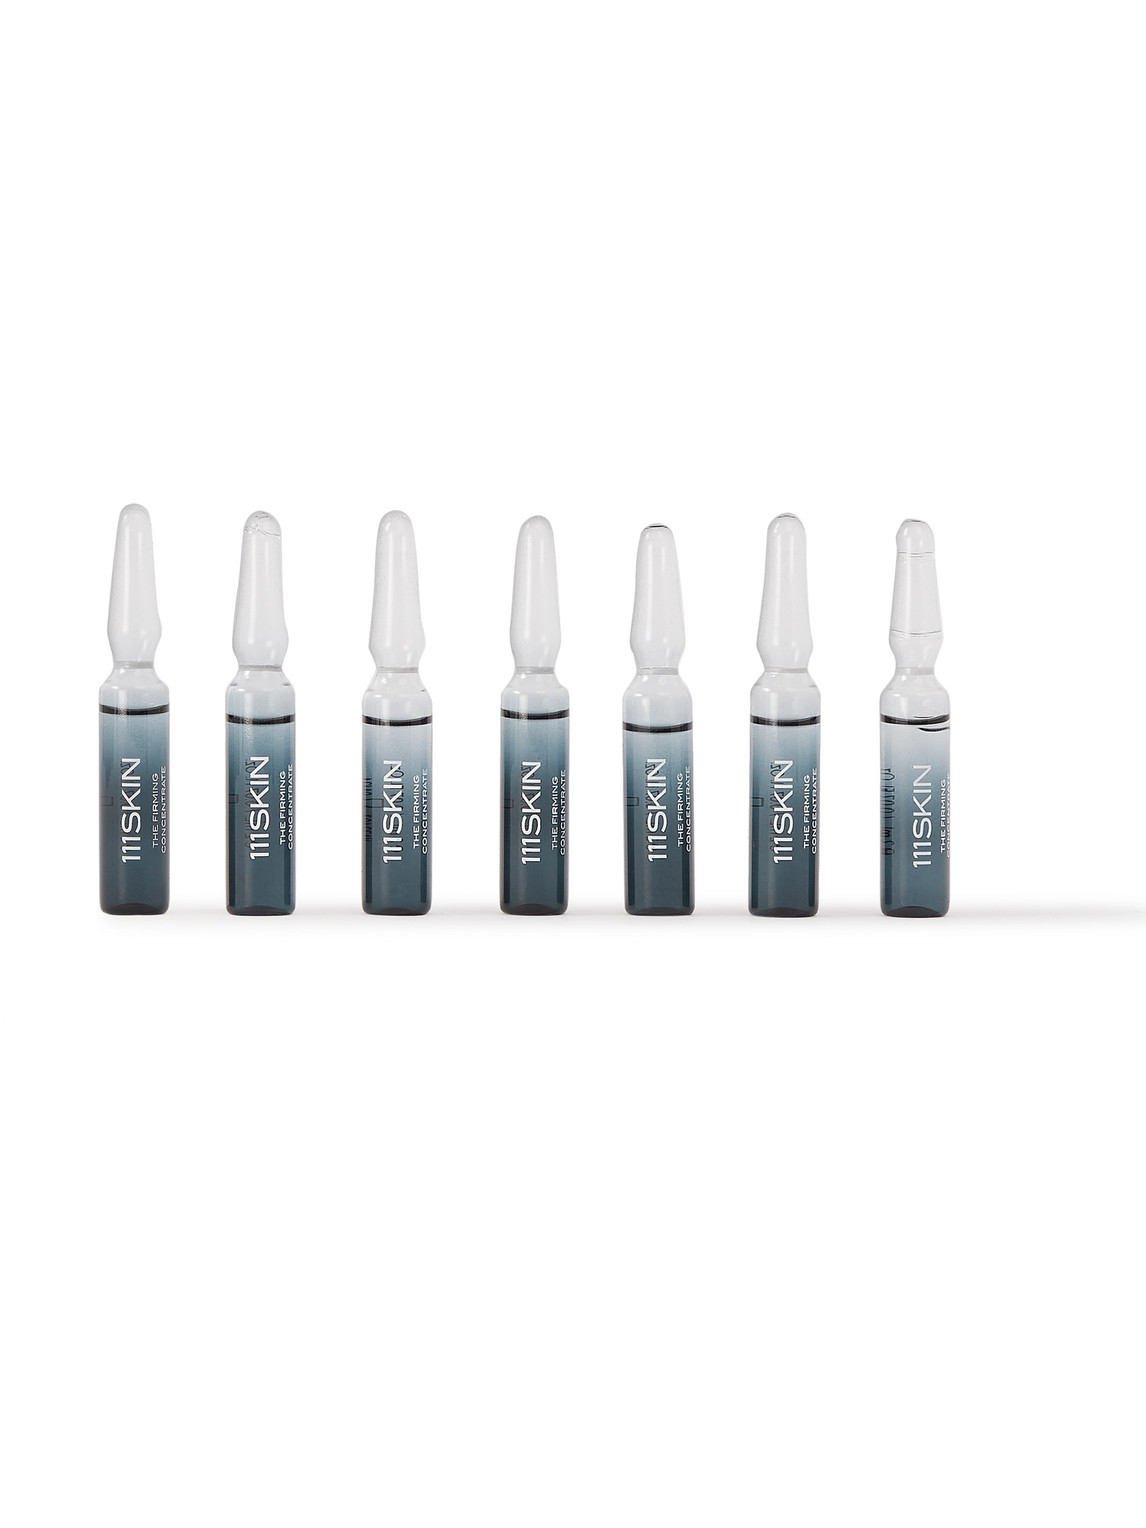 111SKIN THE FIRMING CONCENTRATE, 7 X 2ML